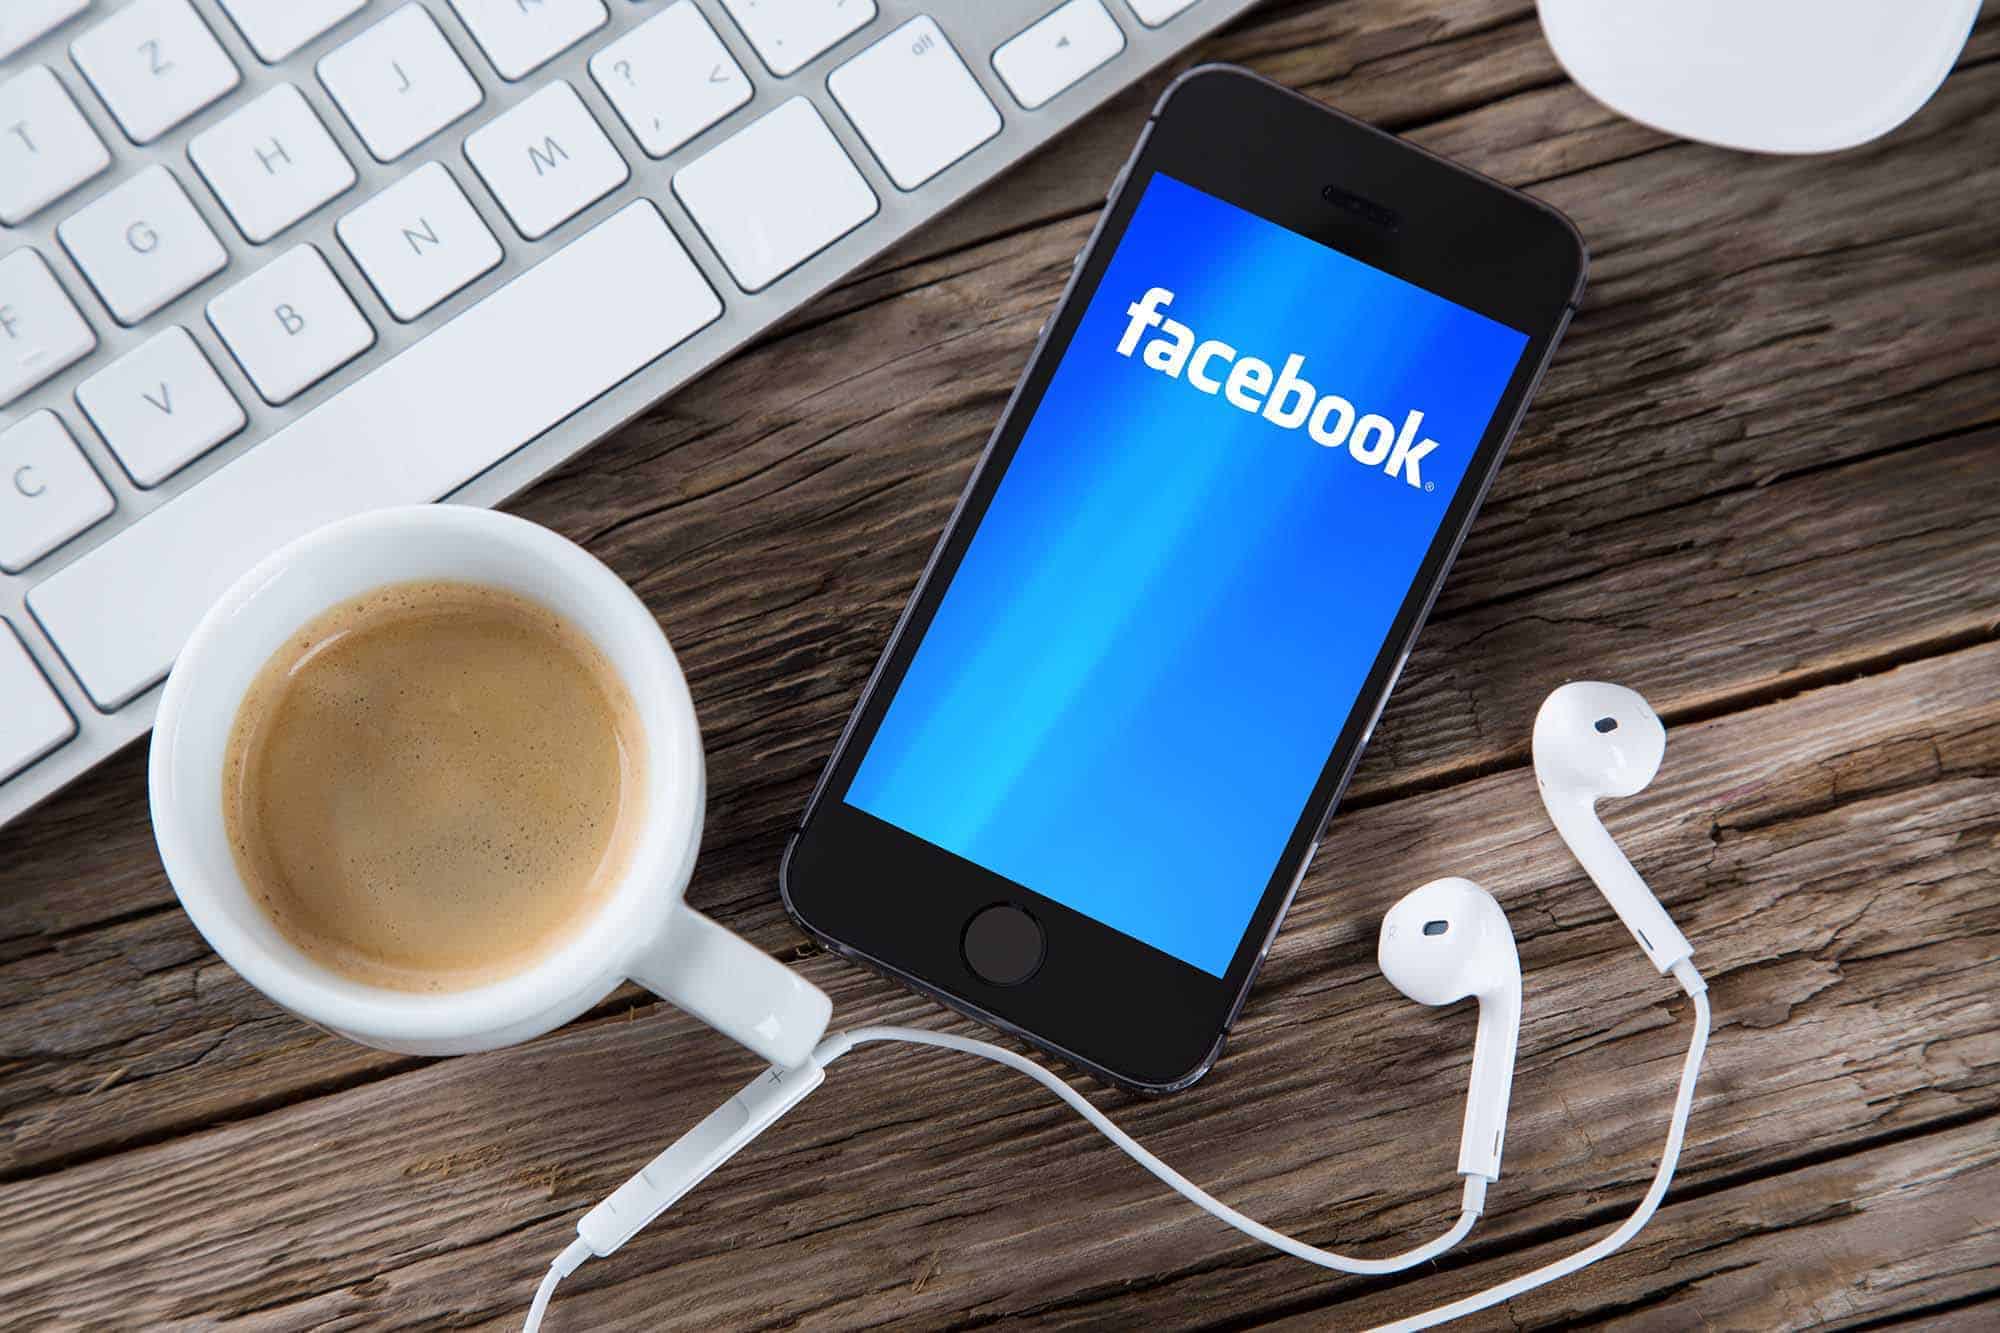 Facebook screen on smart phone with headphones, cup of coffee and computer keyboard on desk